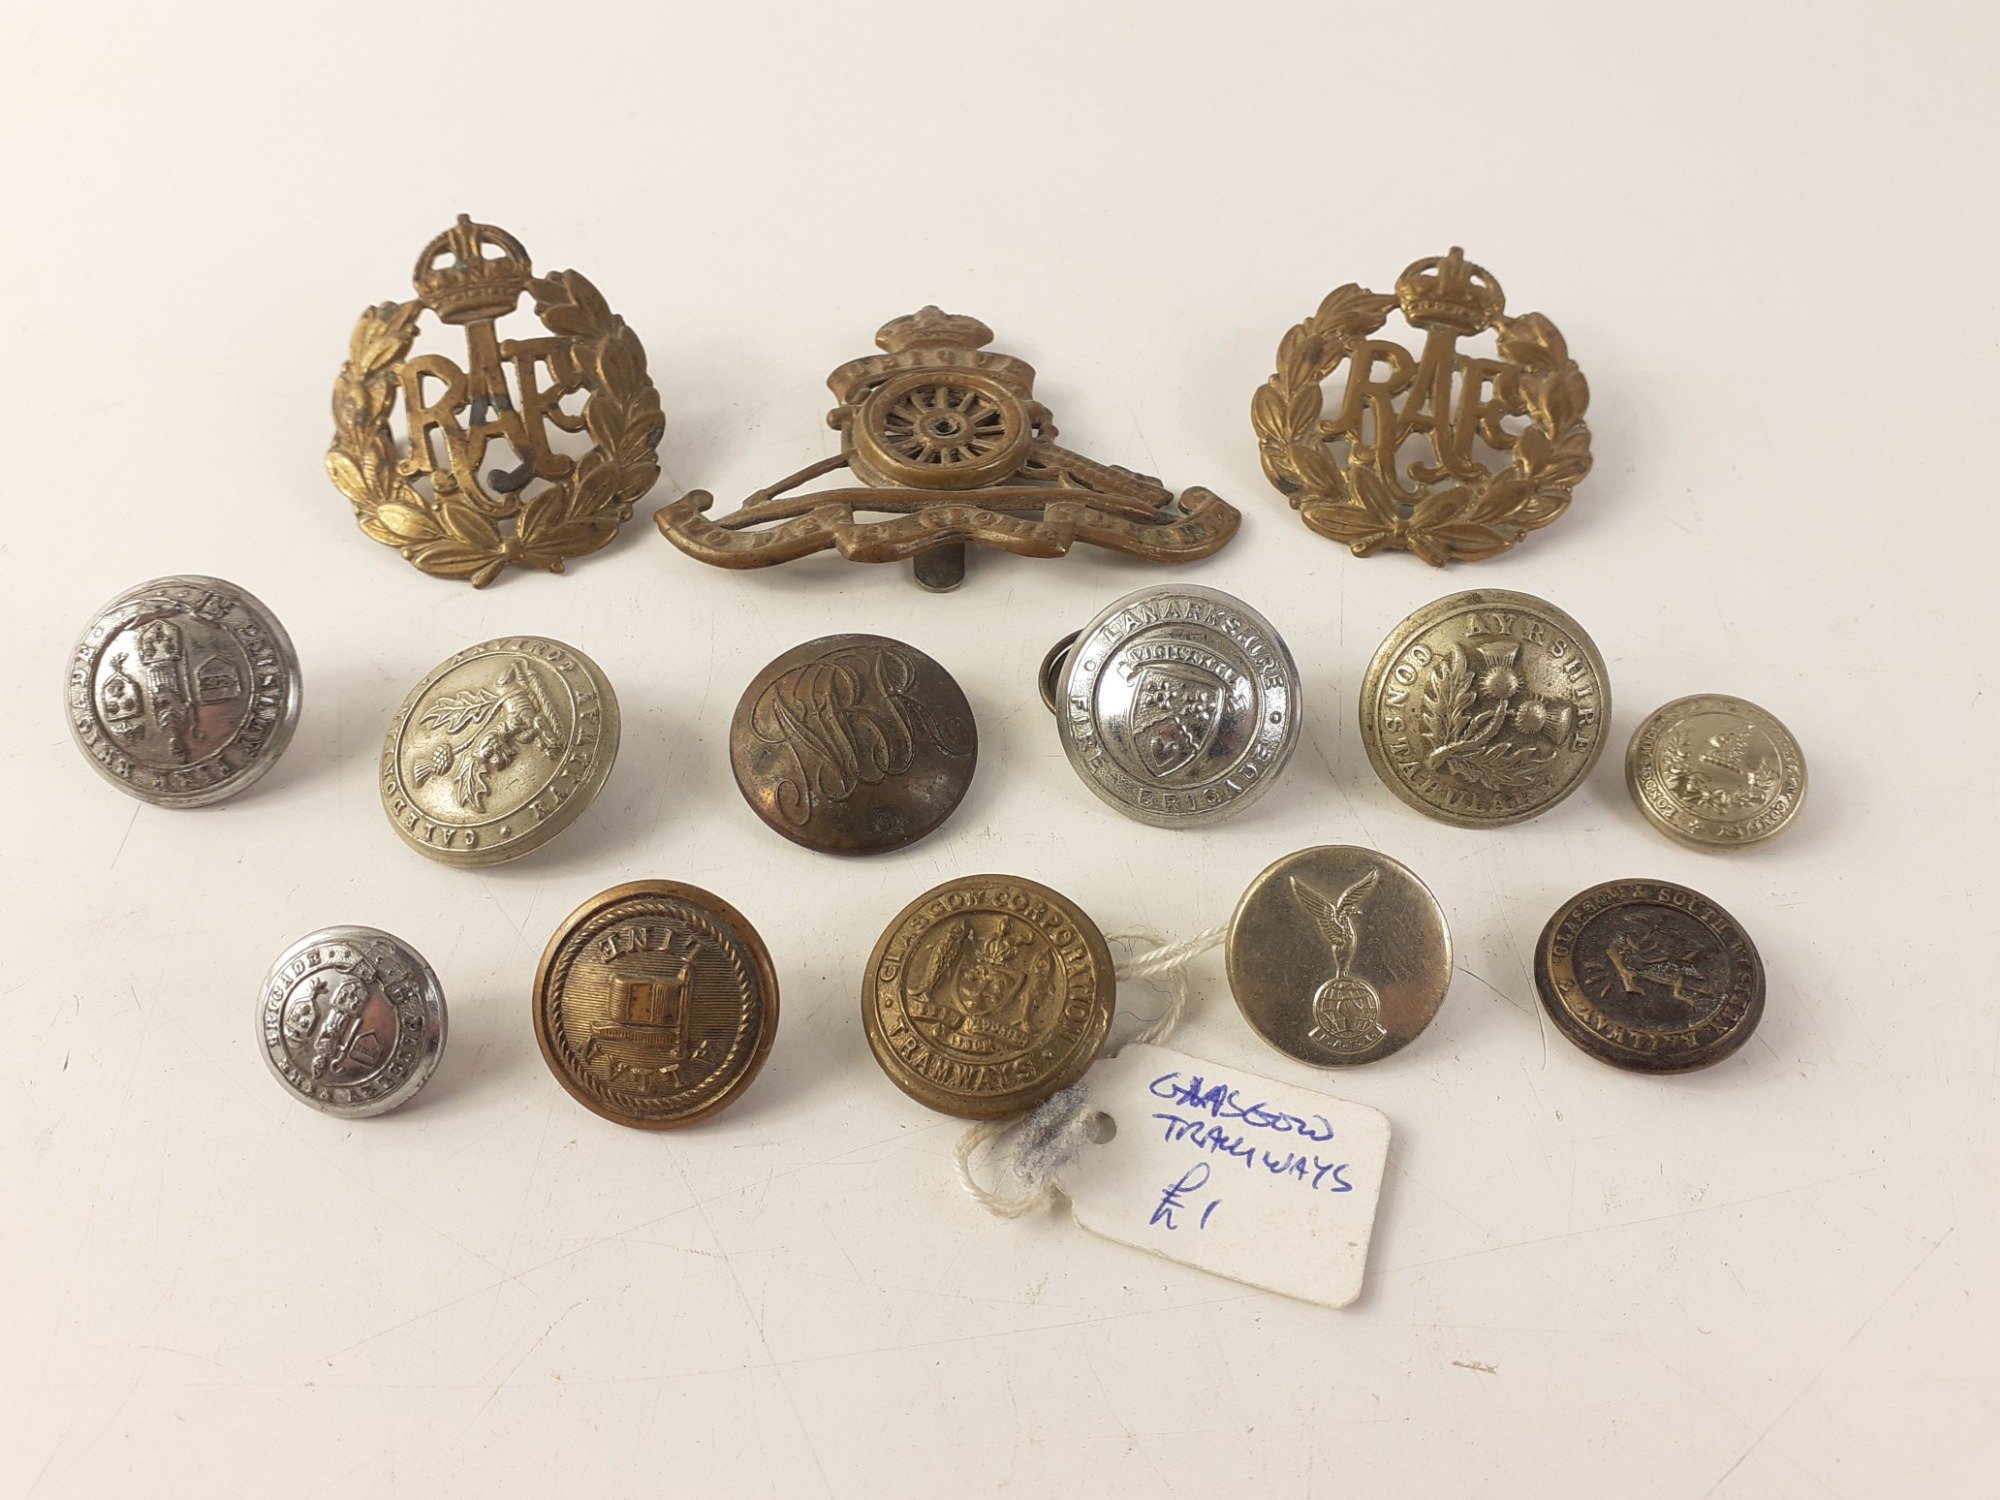 An interesting collection of three military badges and some very unusual and collectible uniform